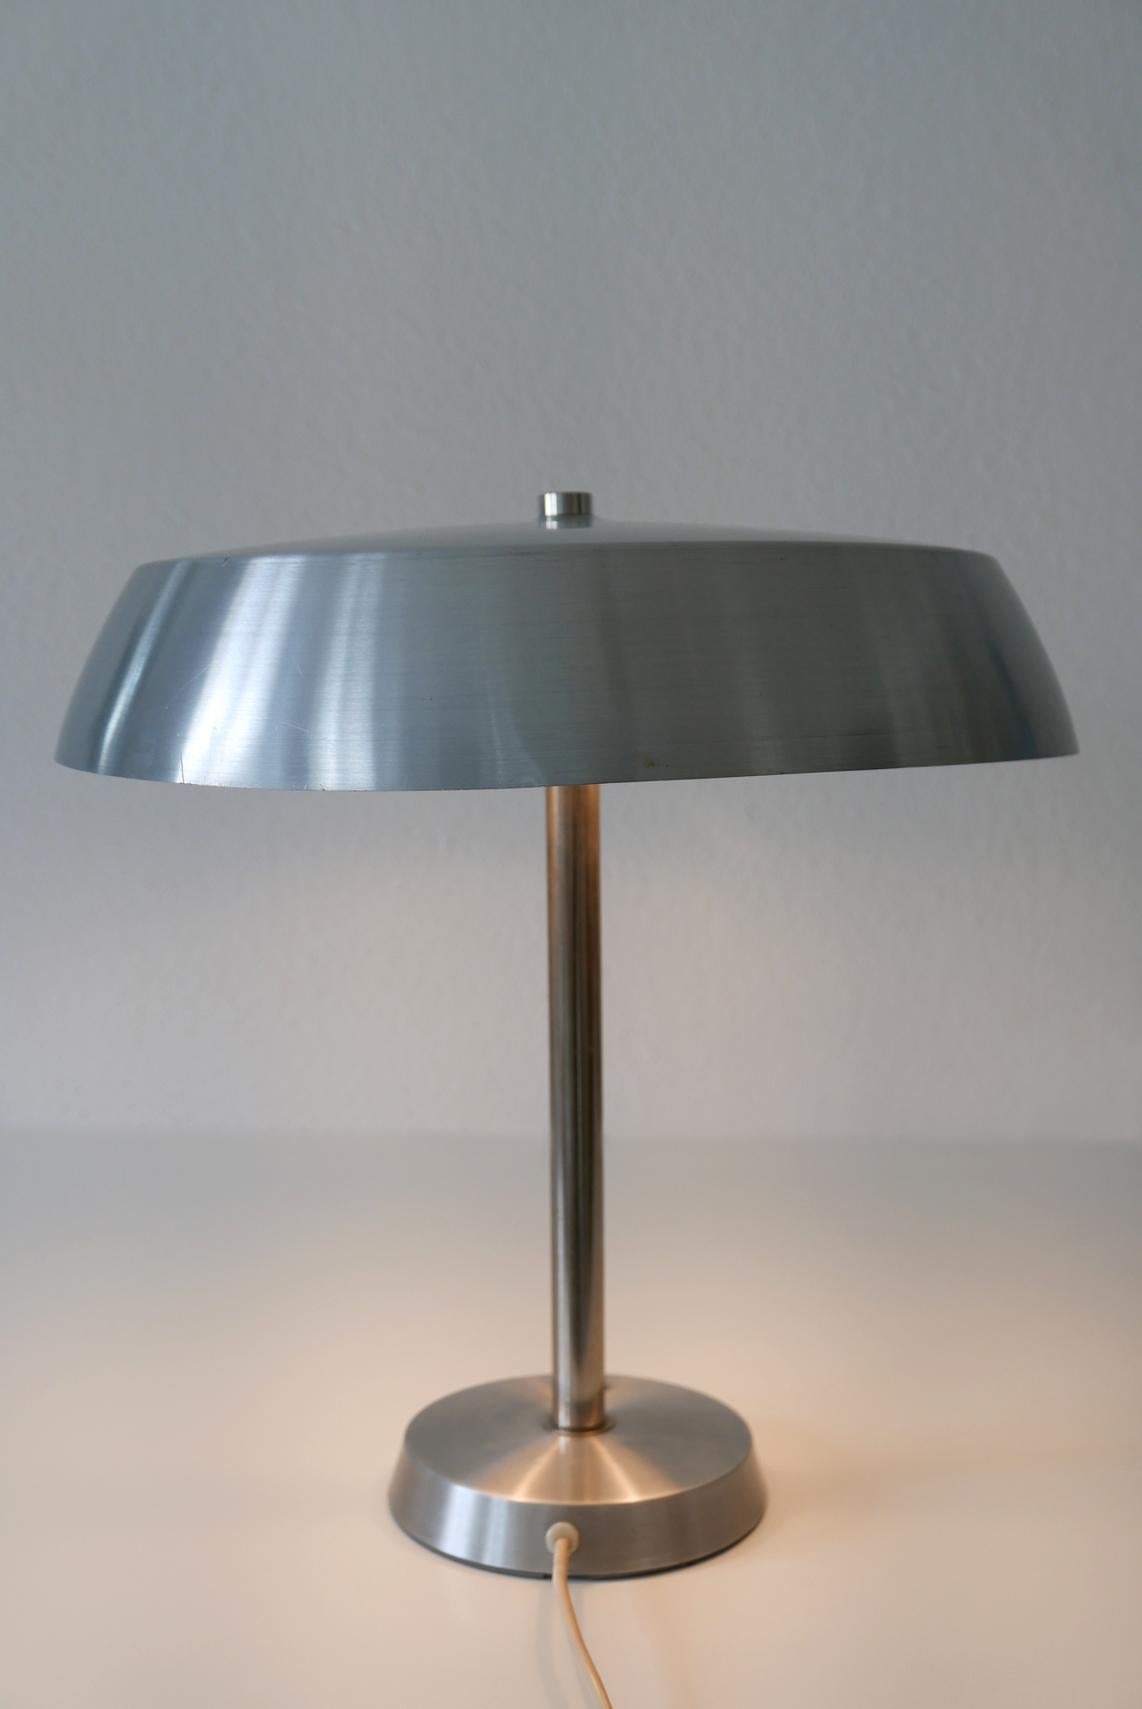 Elegant Mid-Century Modern table lamp by SIS, 1960s, Germany.

Executed in polished aluminium sheet and nickel-plated steel tube. The lamp needs 2 x E27 Edison screw fit bulbs, is wired, and in working condition. It runs both on 110 / 230